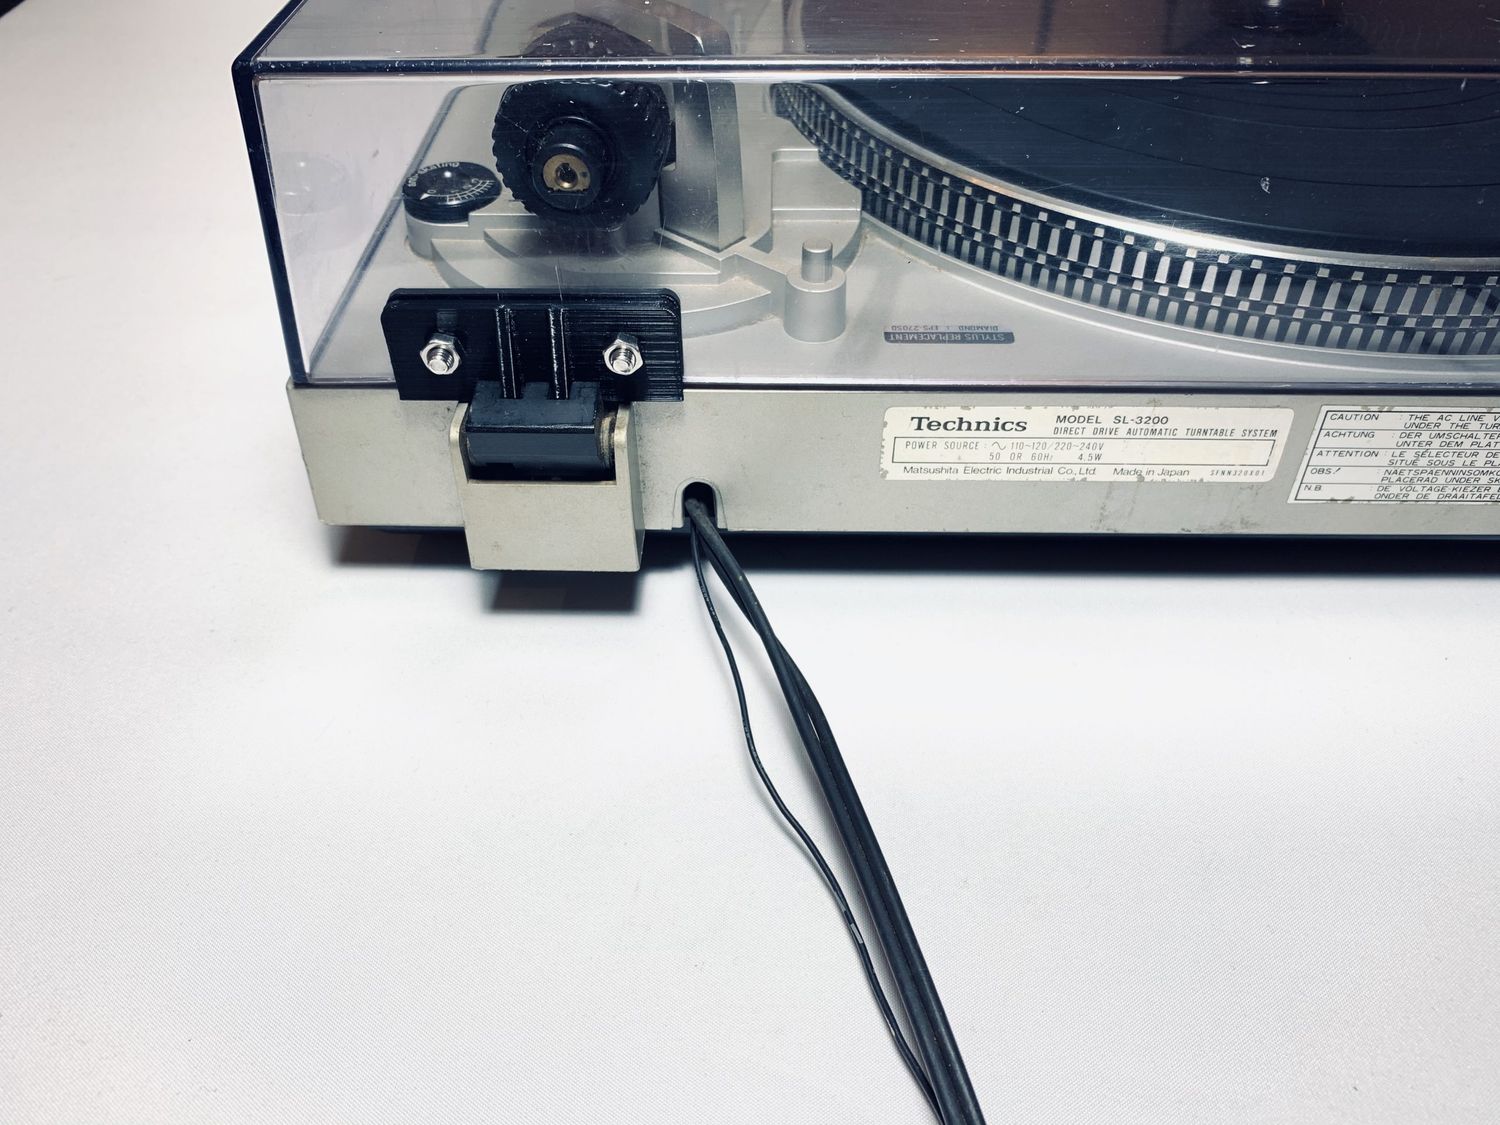 How To Remove Dust Cover Hinges On Technics Turntable